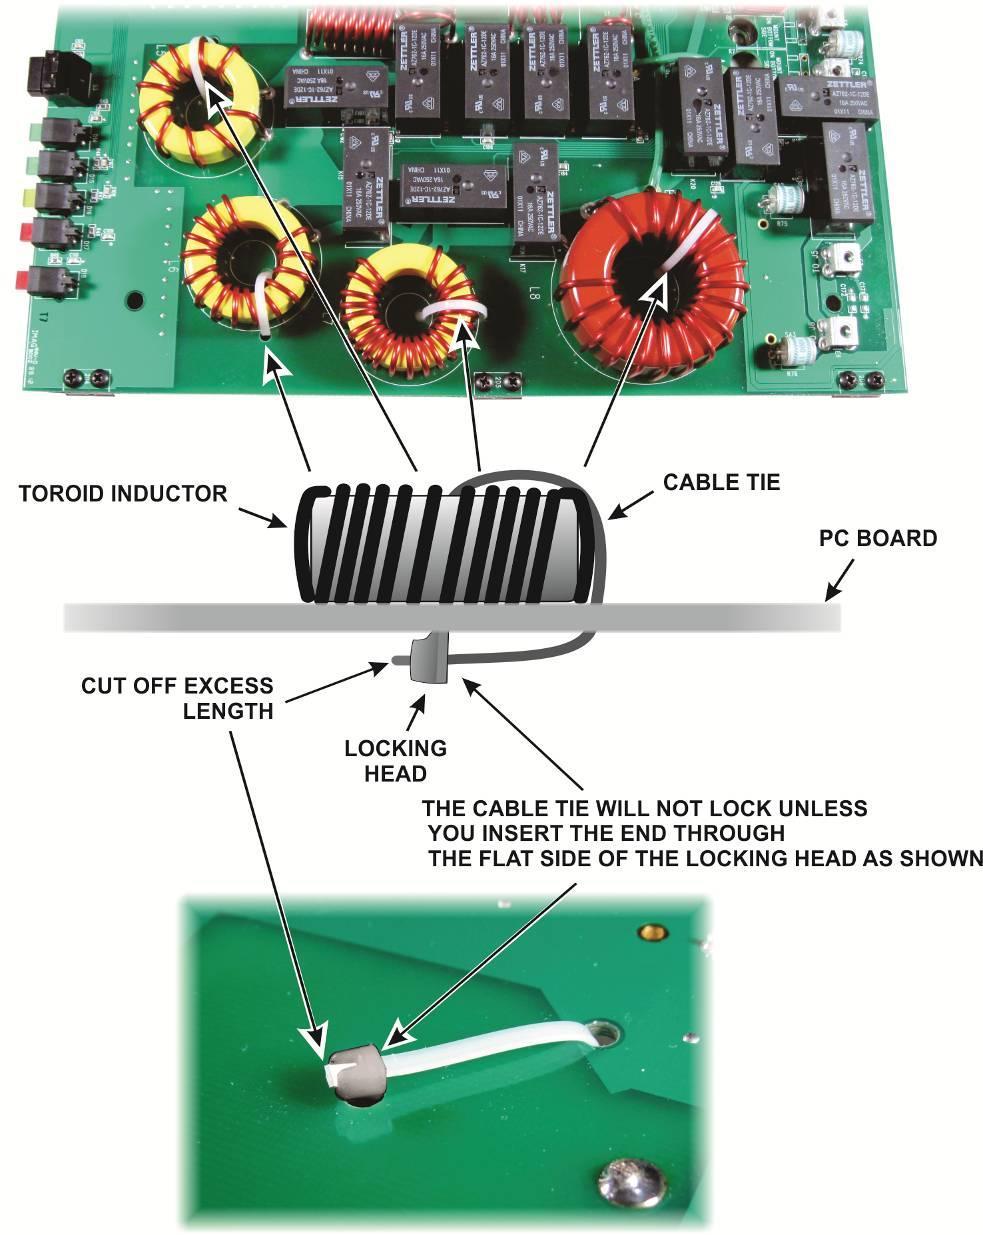 Install a cable tie to secure each of the four large toroidal inductors to the pc board as shown below. Note how the locking heads are positioned below the pc board.